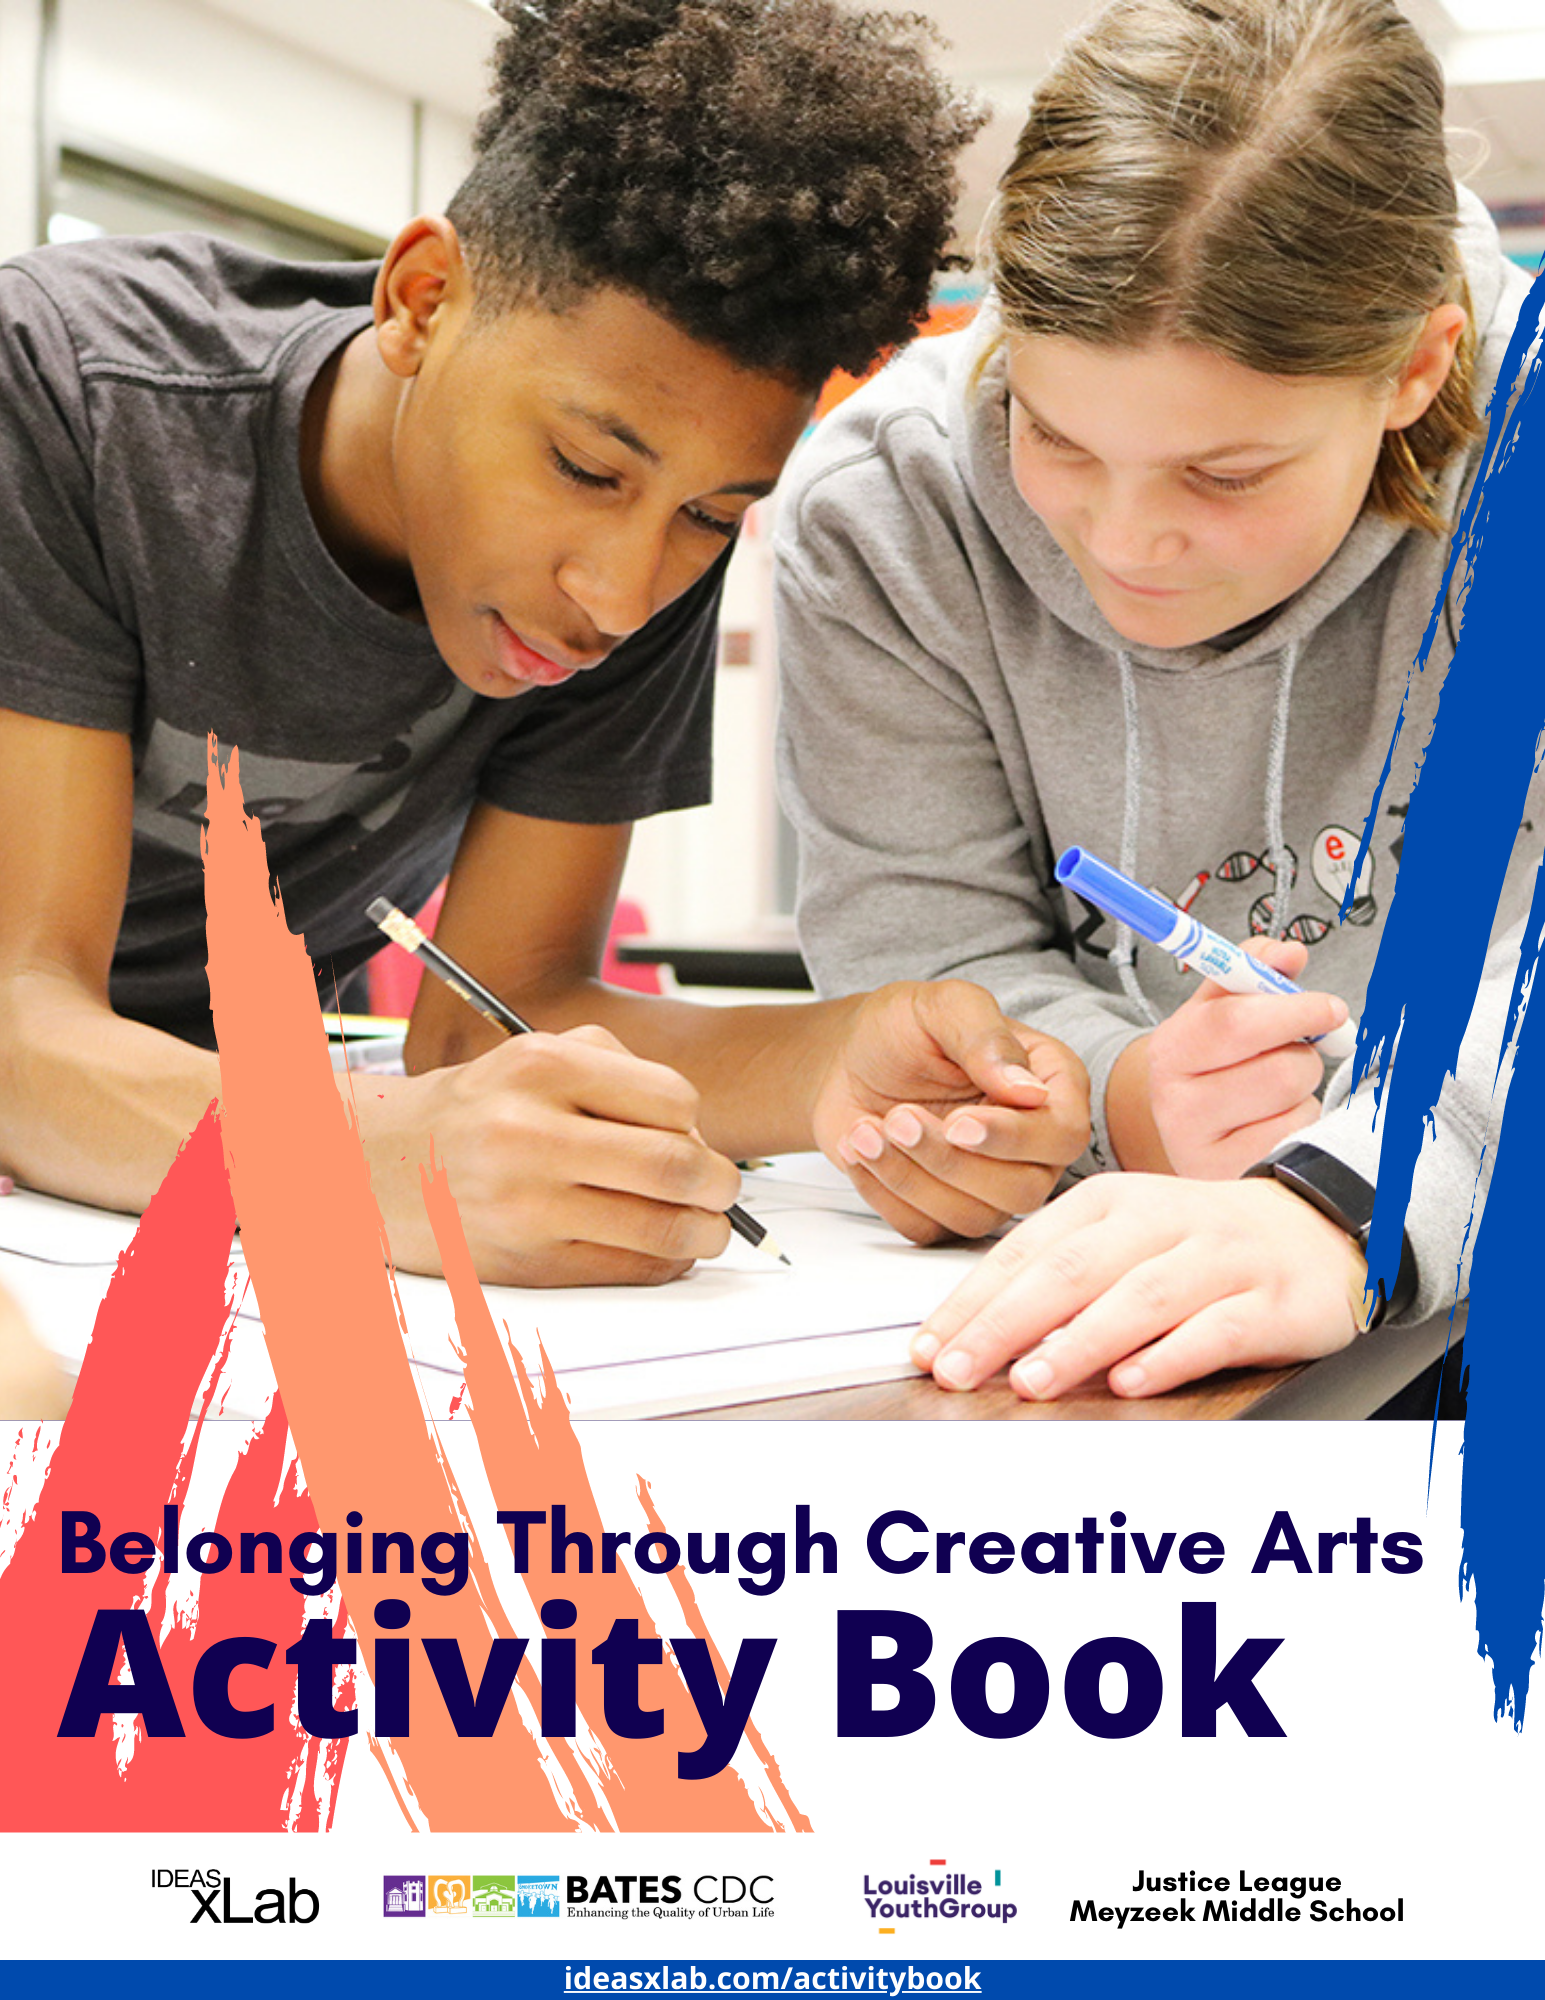 Belonging Through Creative Arts Activity Book published by IDEAS xLab